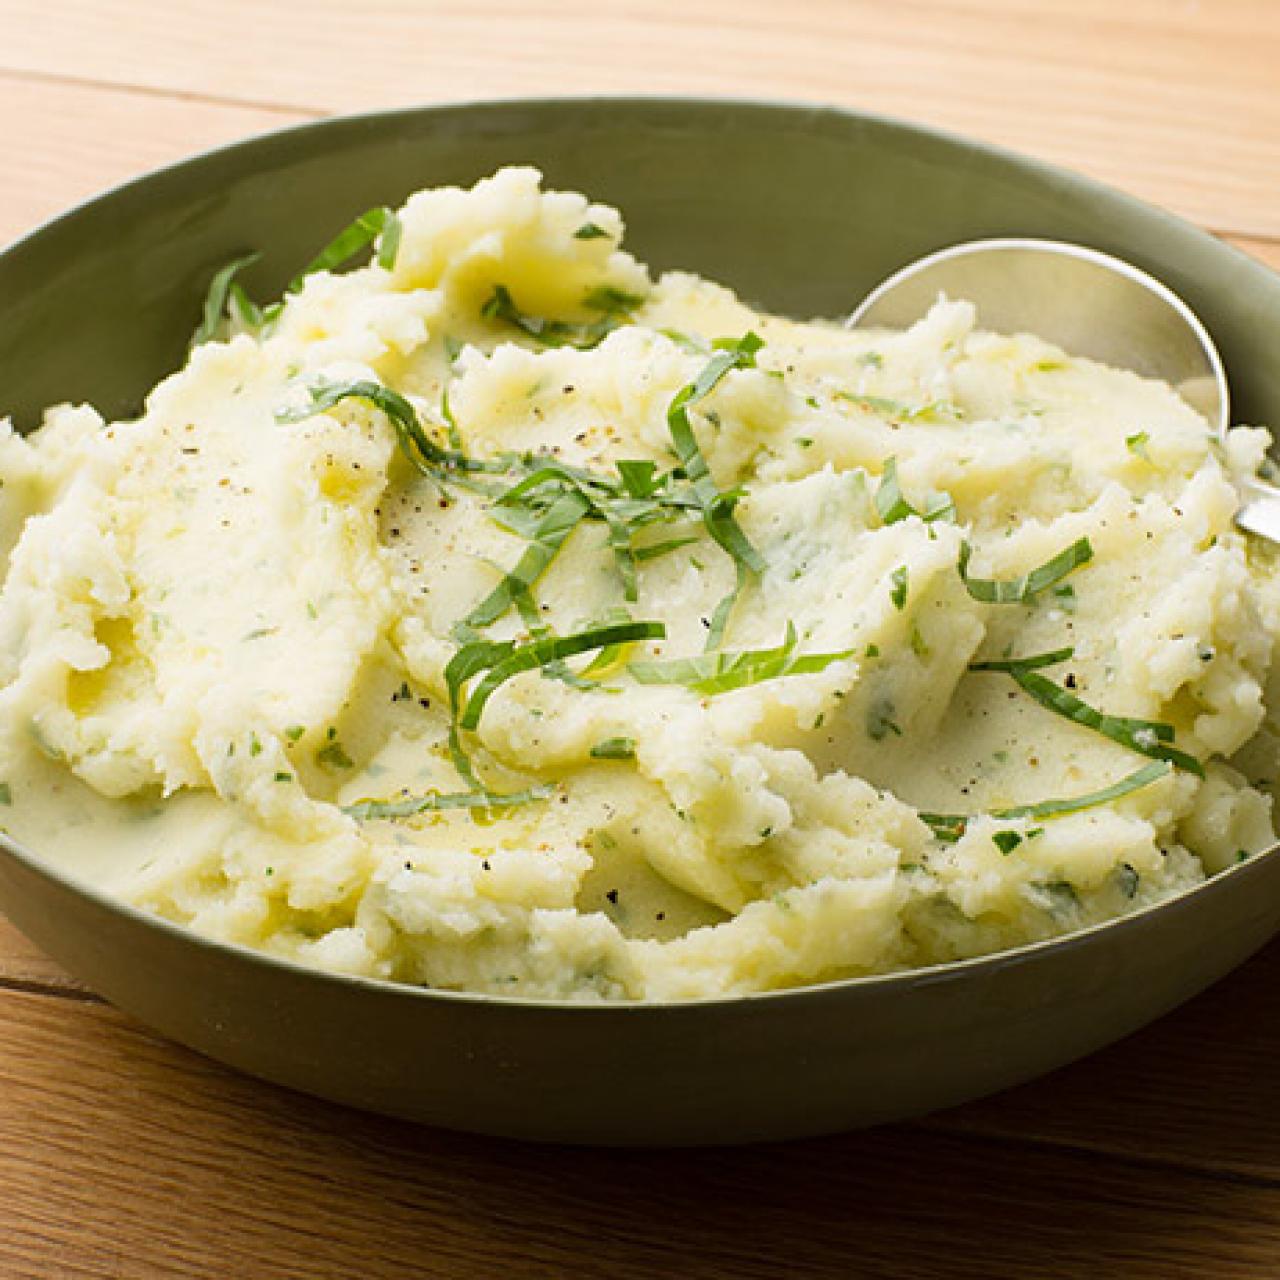 What Herbs To Add To Mashed Potatoes